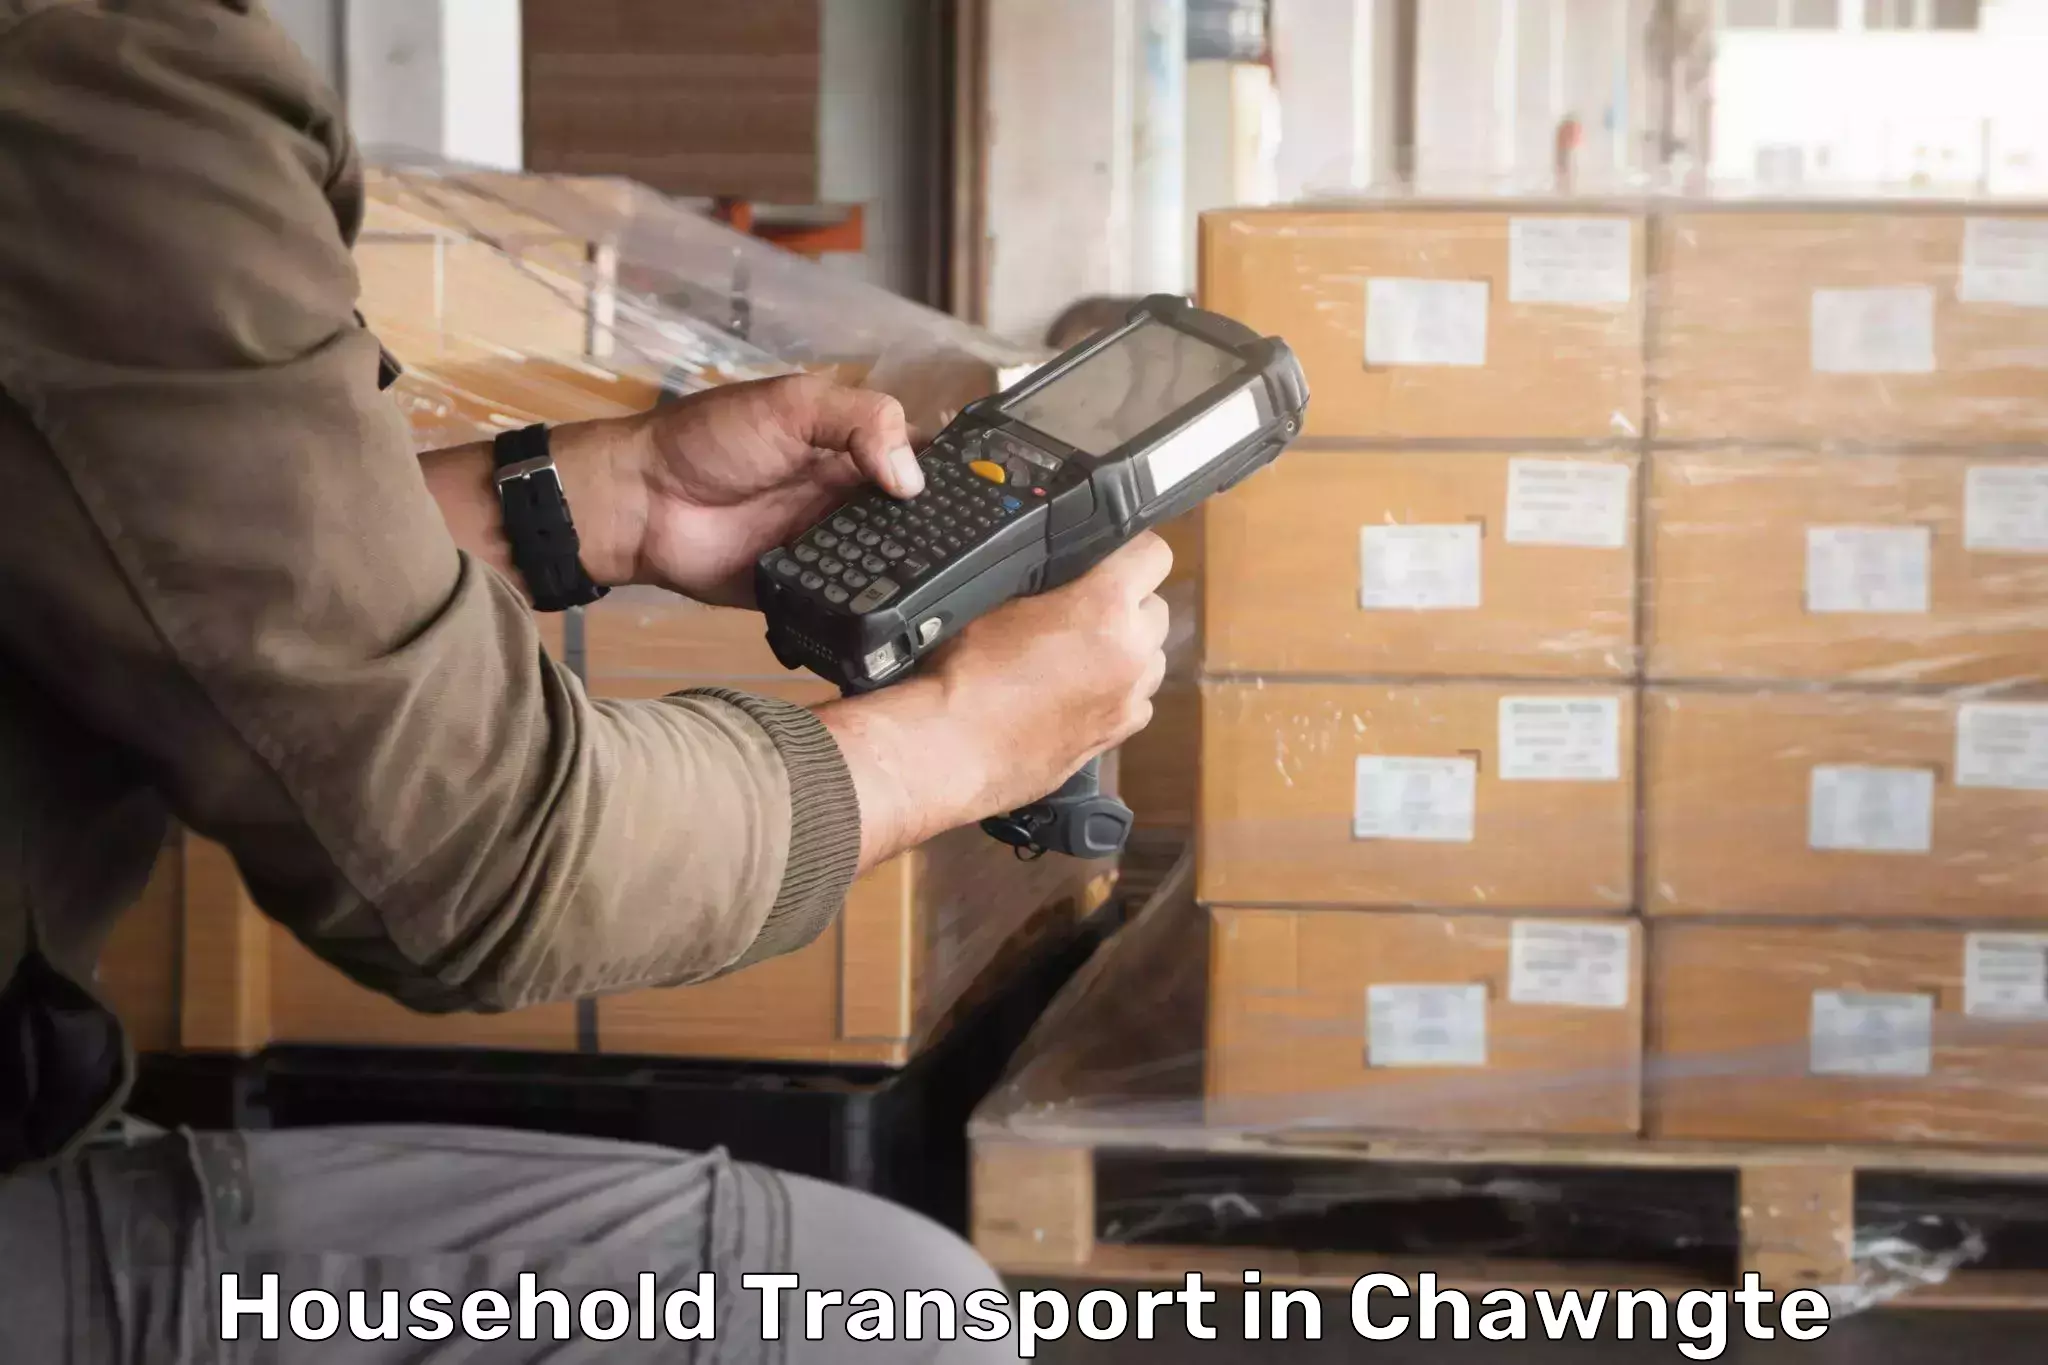 Home shifting experts in Chawngte